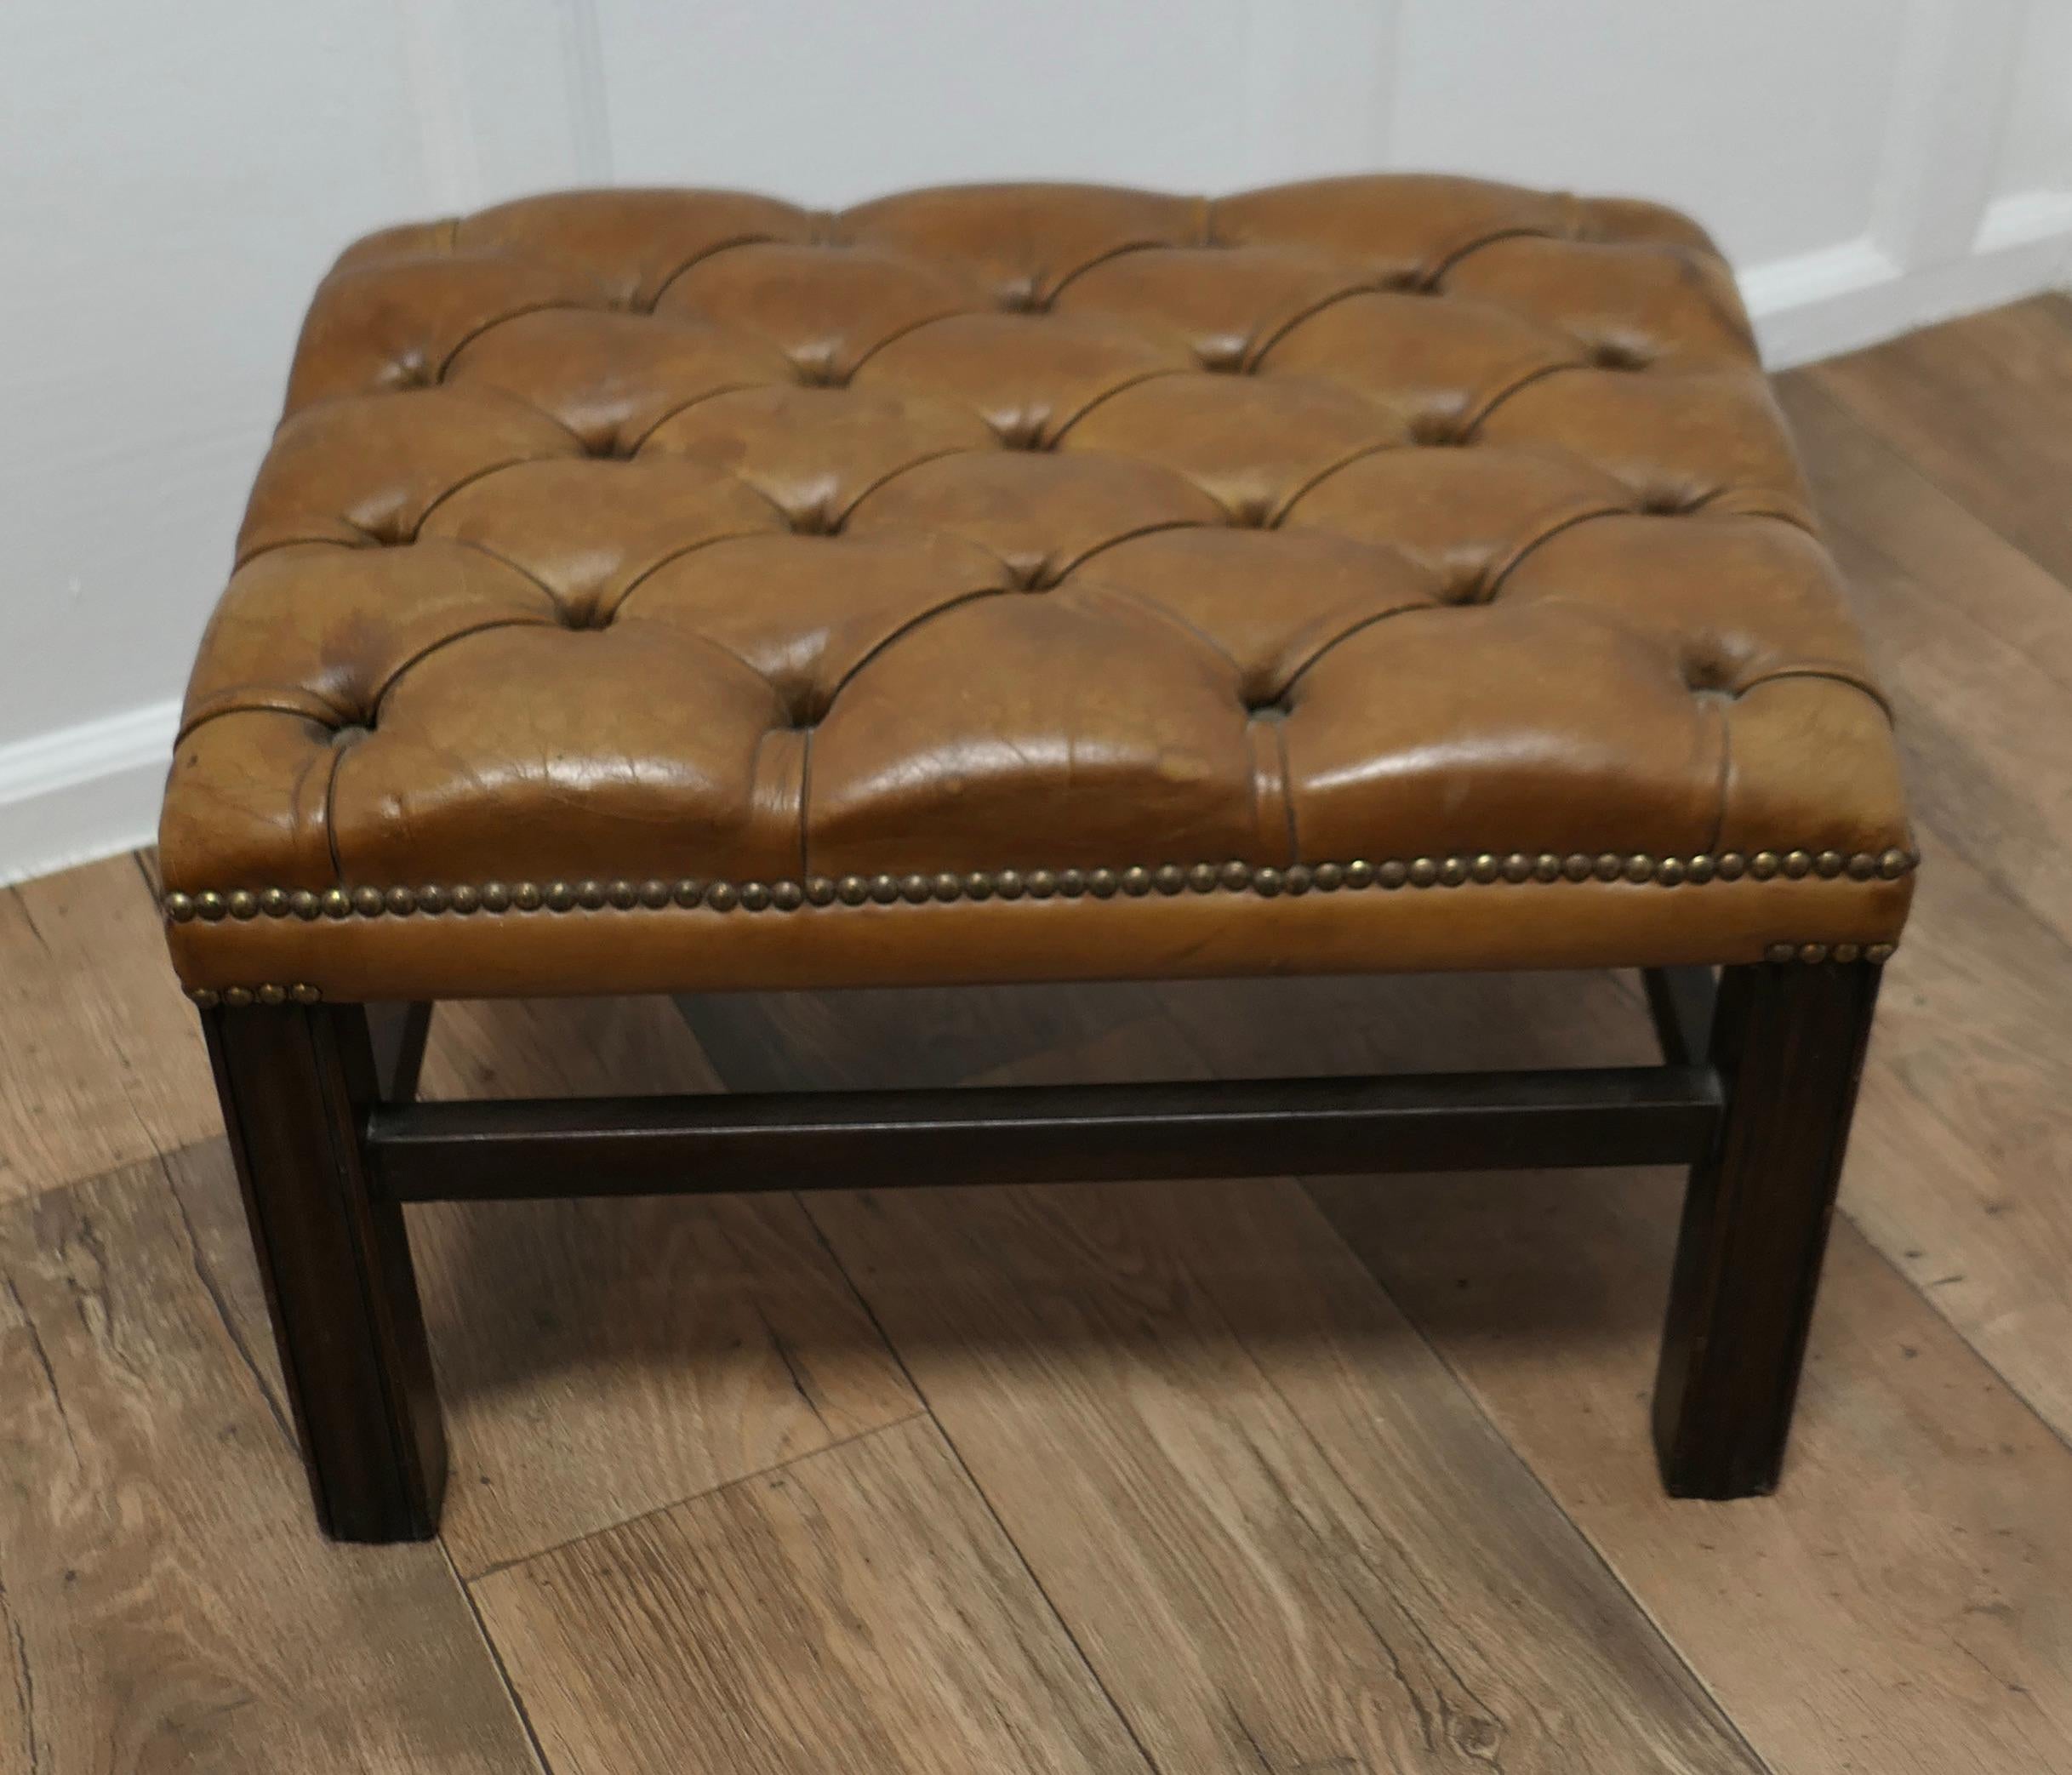 Deeply Buttoned Chesterfield Tan Leather Library Stool 

This is a good Sturdy Library Stool it has sturdy reeded legs with cross stretchers
The stool is upholstered in a Tan Leather this is not new but it is has no tears or holes

This sturdy